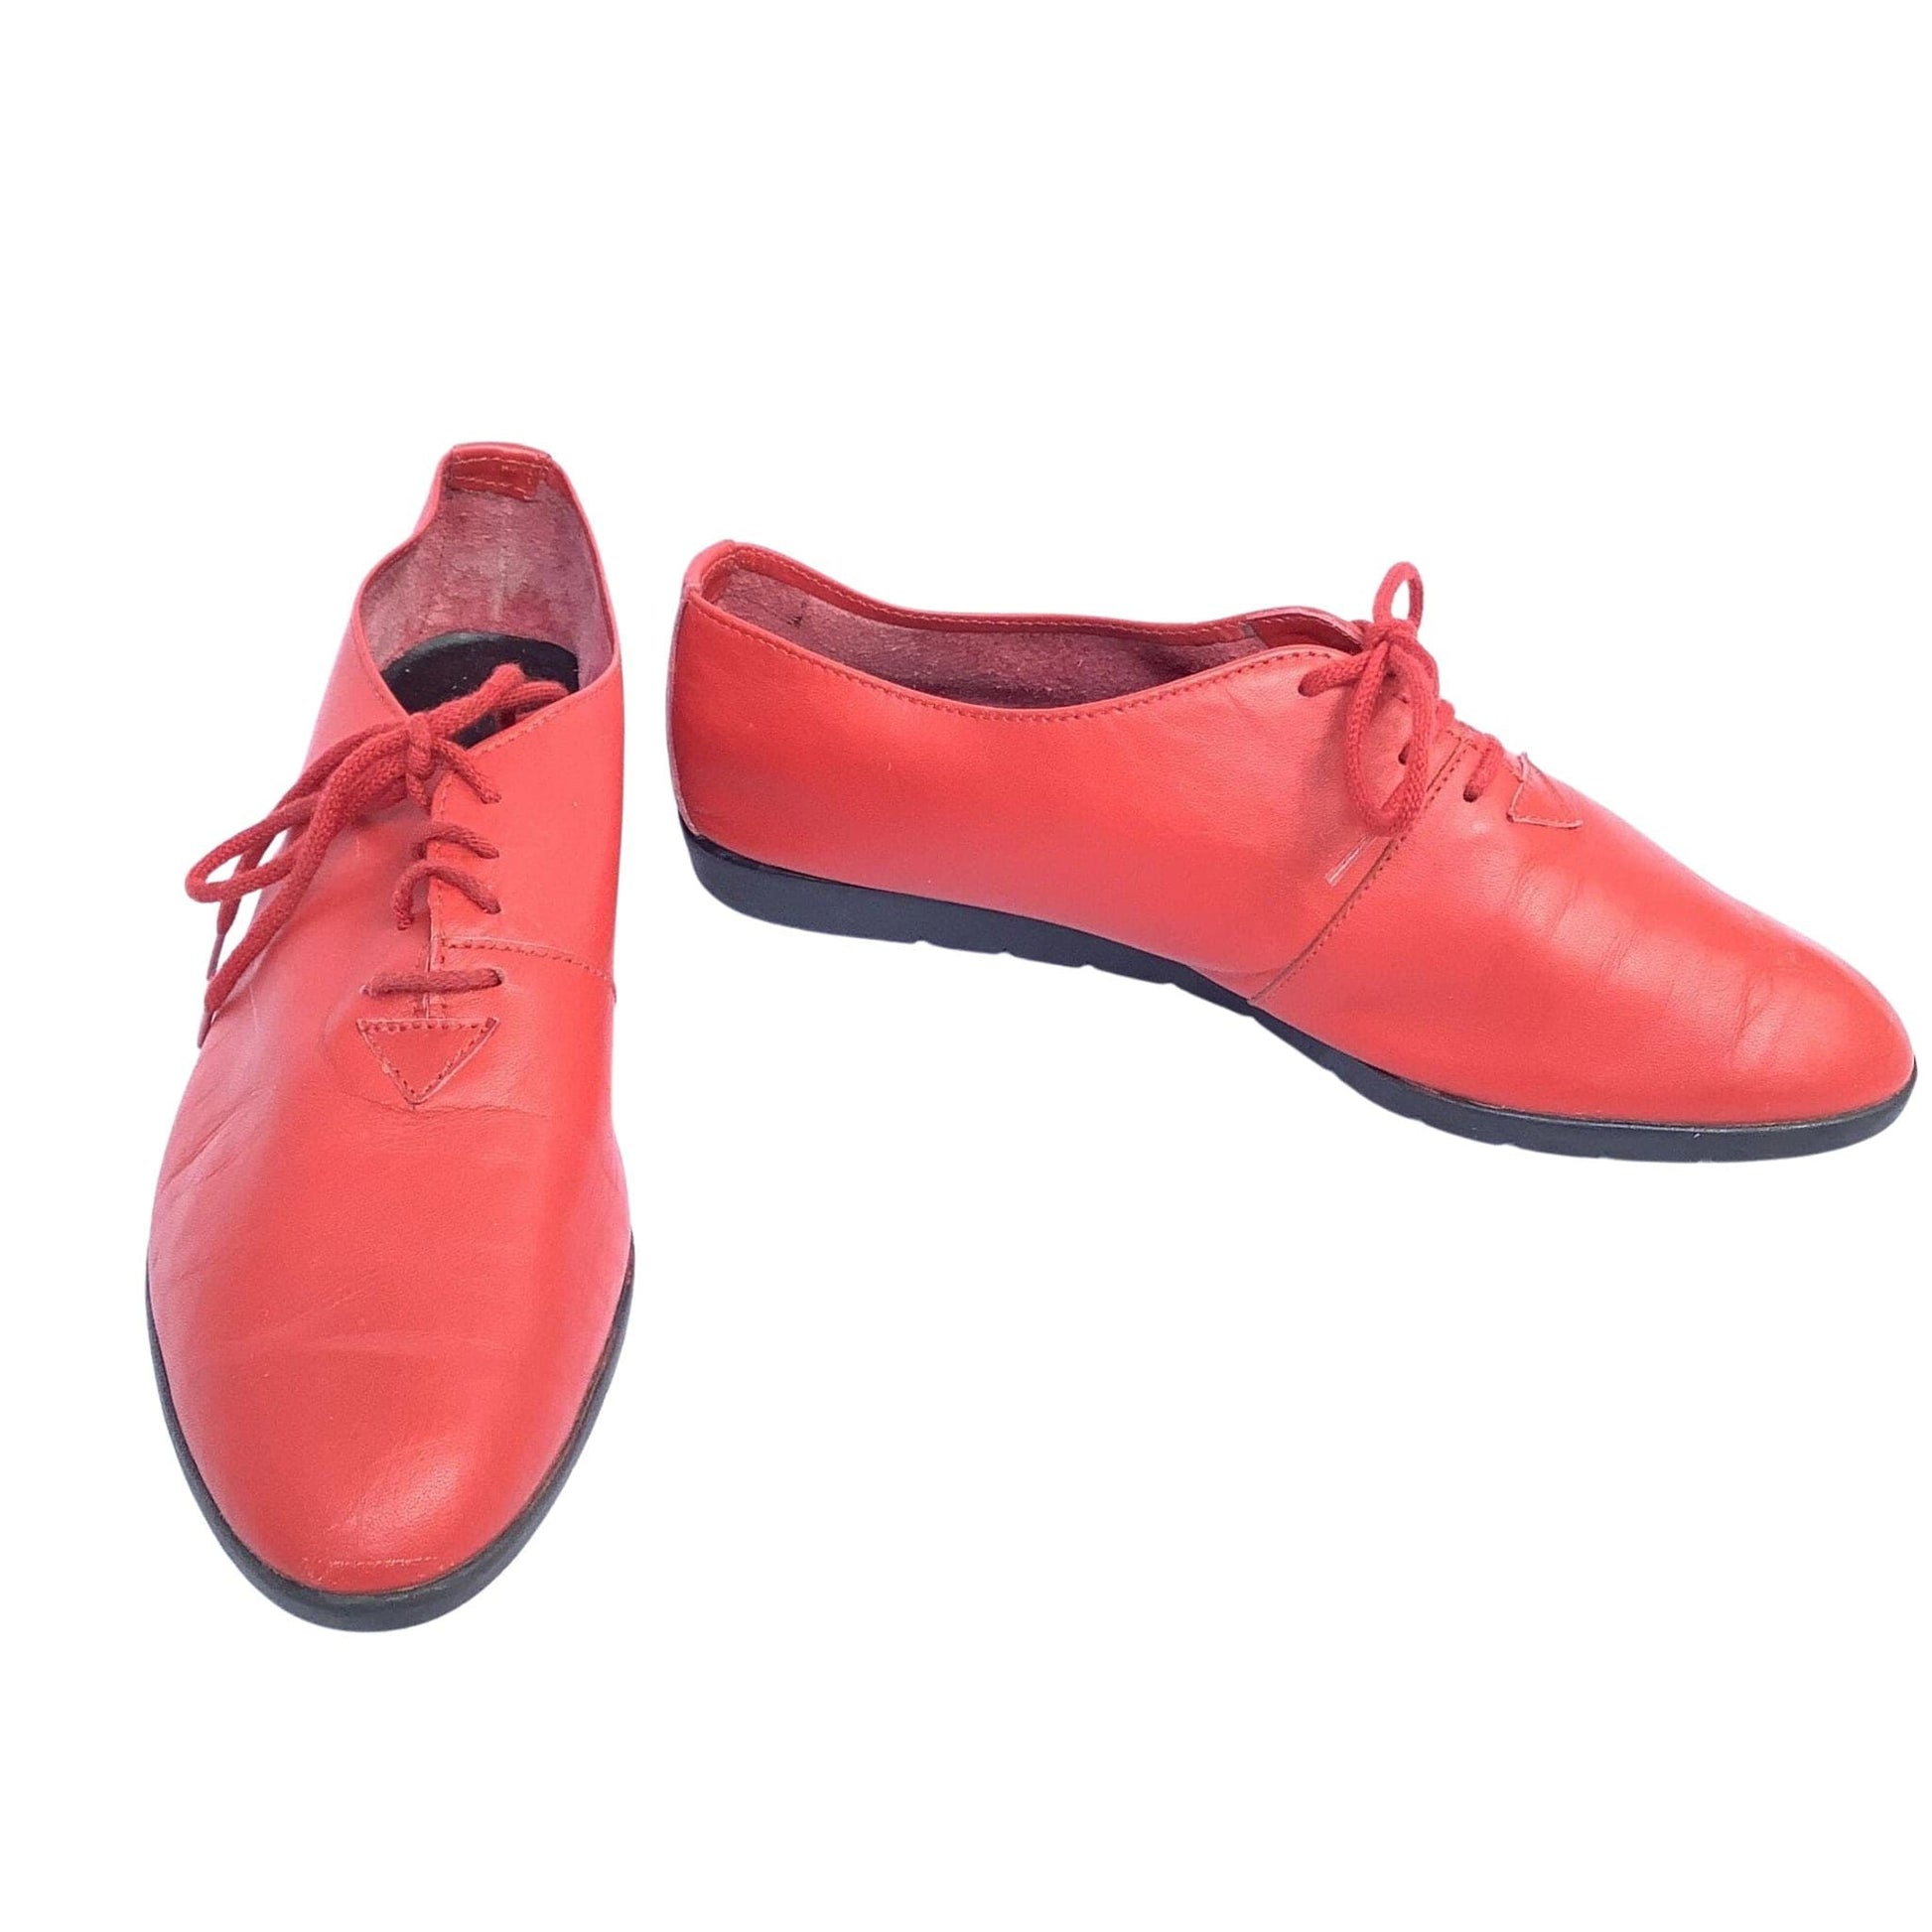 1980s Flat Red Oxfords 7.5 / Red / Vintage 1980s